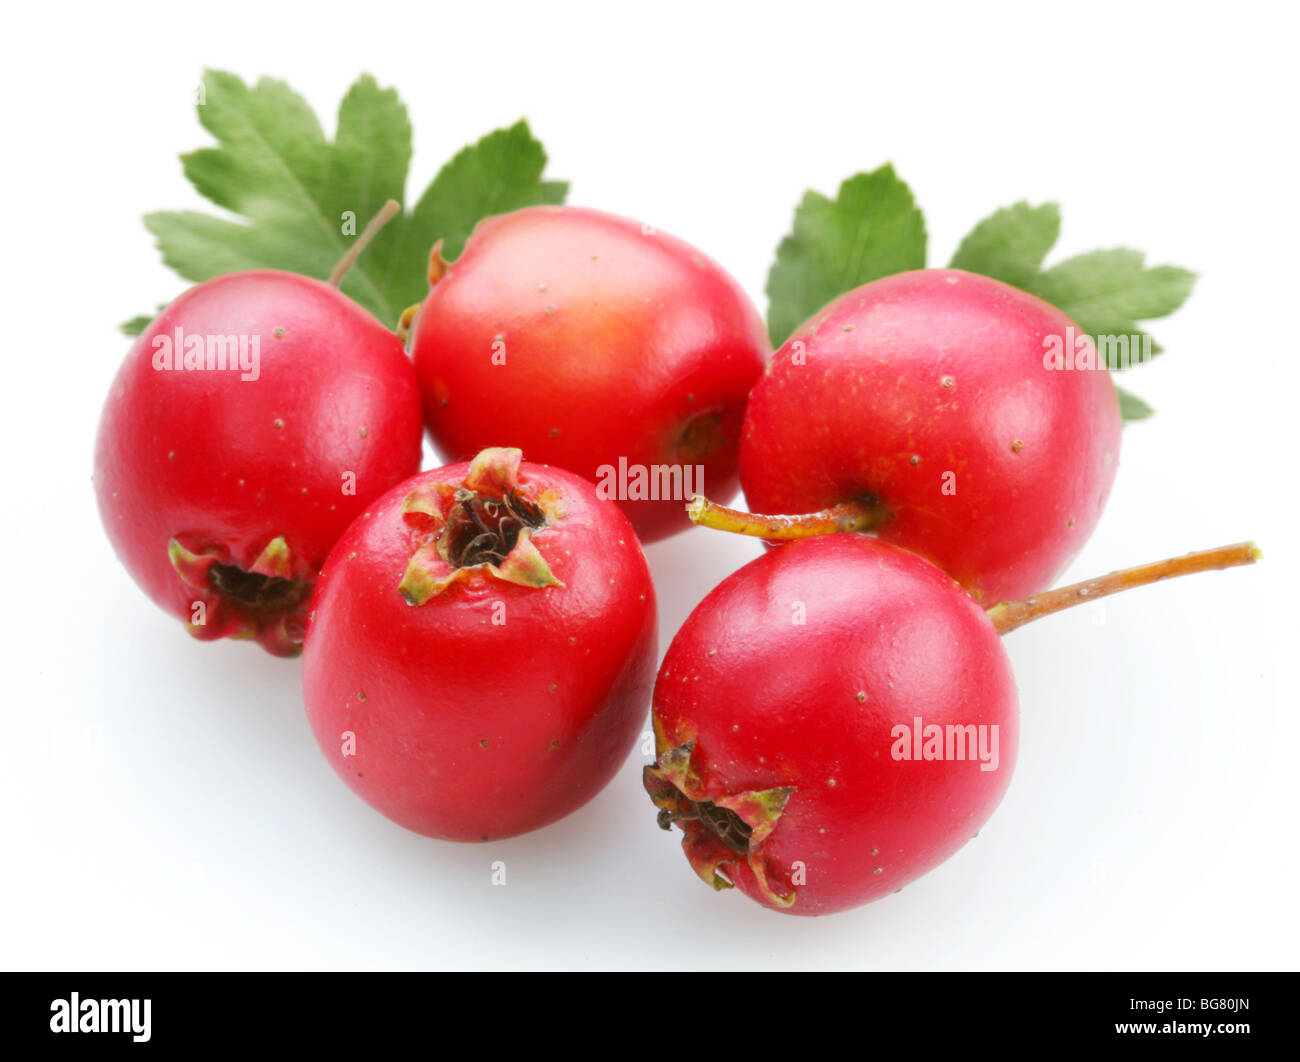 hawthorn on a white background Stock Photo